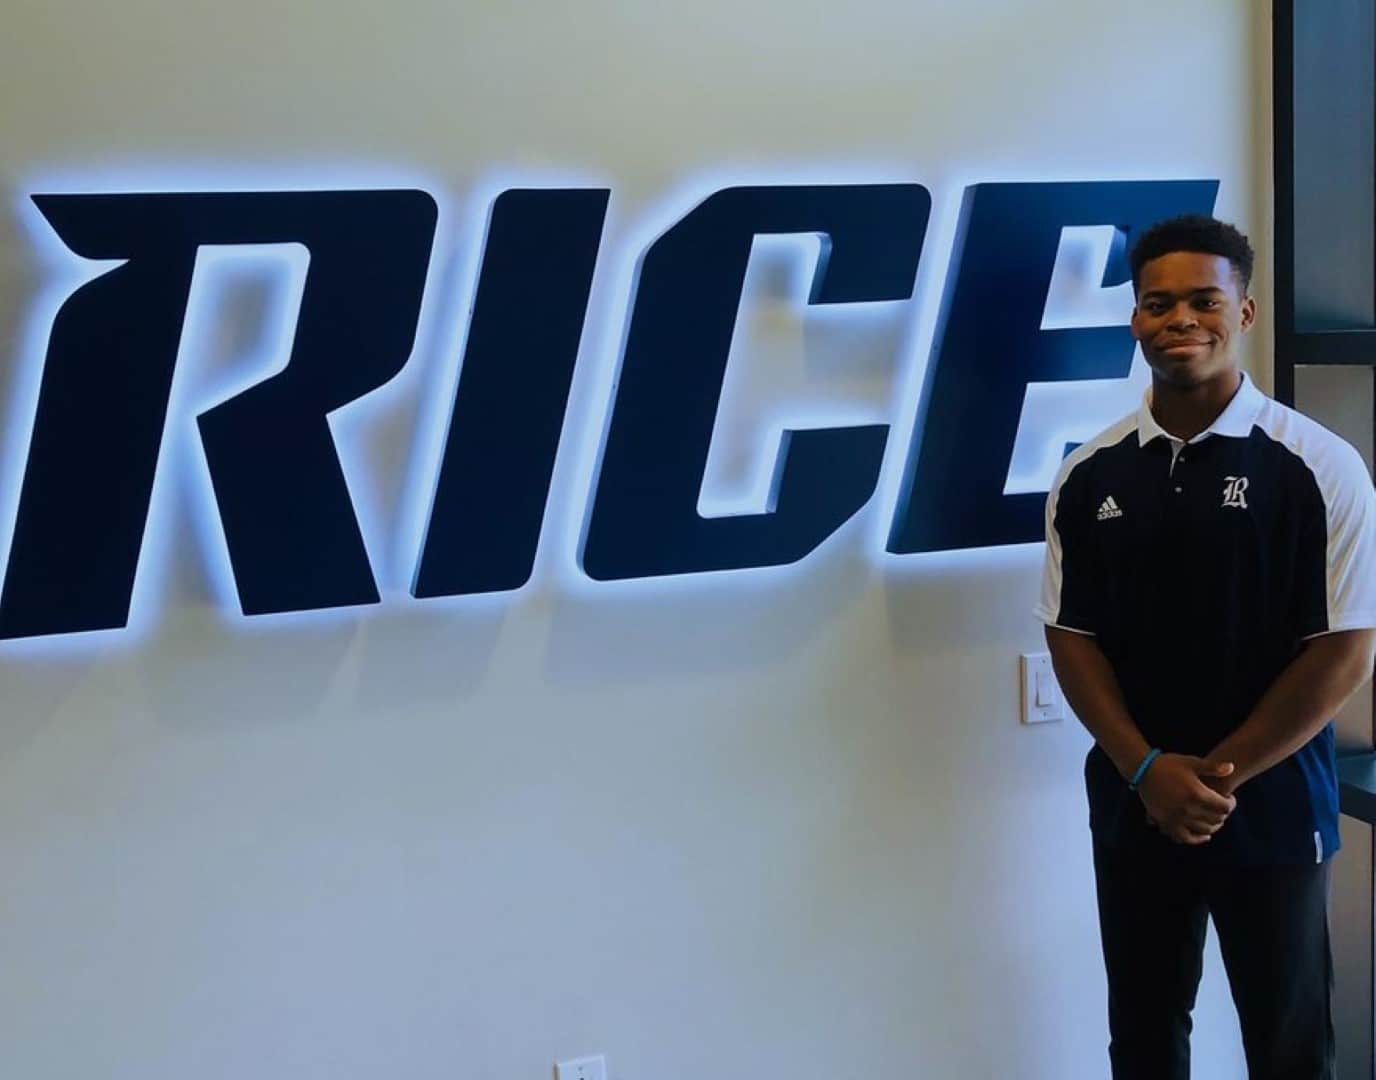 Julian Logan (’15) is majoring in industrial and systems engineering at the University of Oklahoma with plans to graduate in May 2020. Over the summer, Julian enjoyed his role as the Associate Logistics Intern in the Athletic Department of Rice University in Houston, TX.